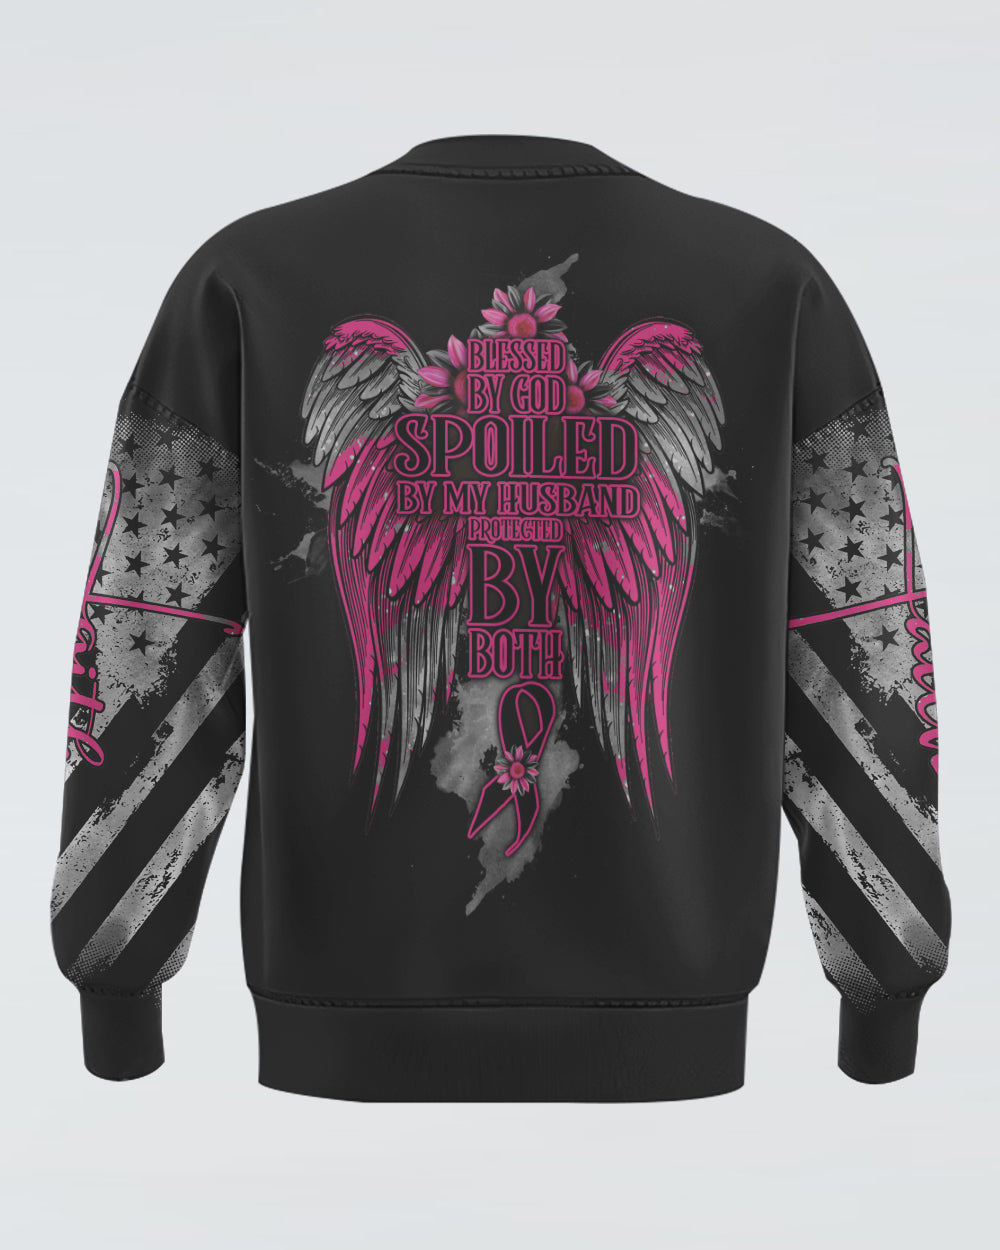 Blessed By God Spoiled By My Husband Women's Breast Cancer Awareness Sweatshirt